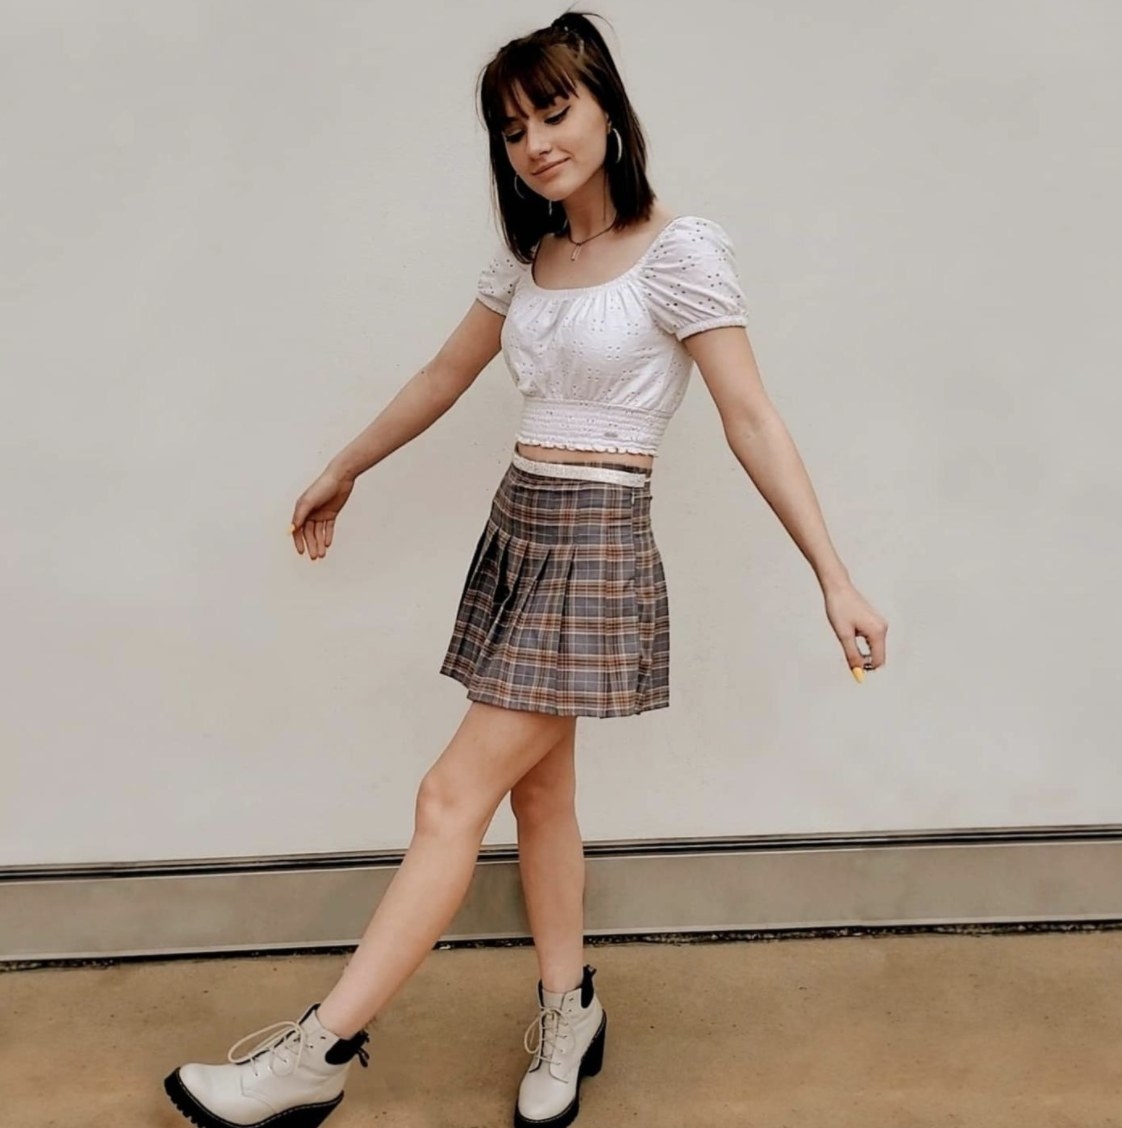 A person wearing a white top and pleated plaid skirt